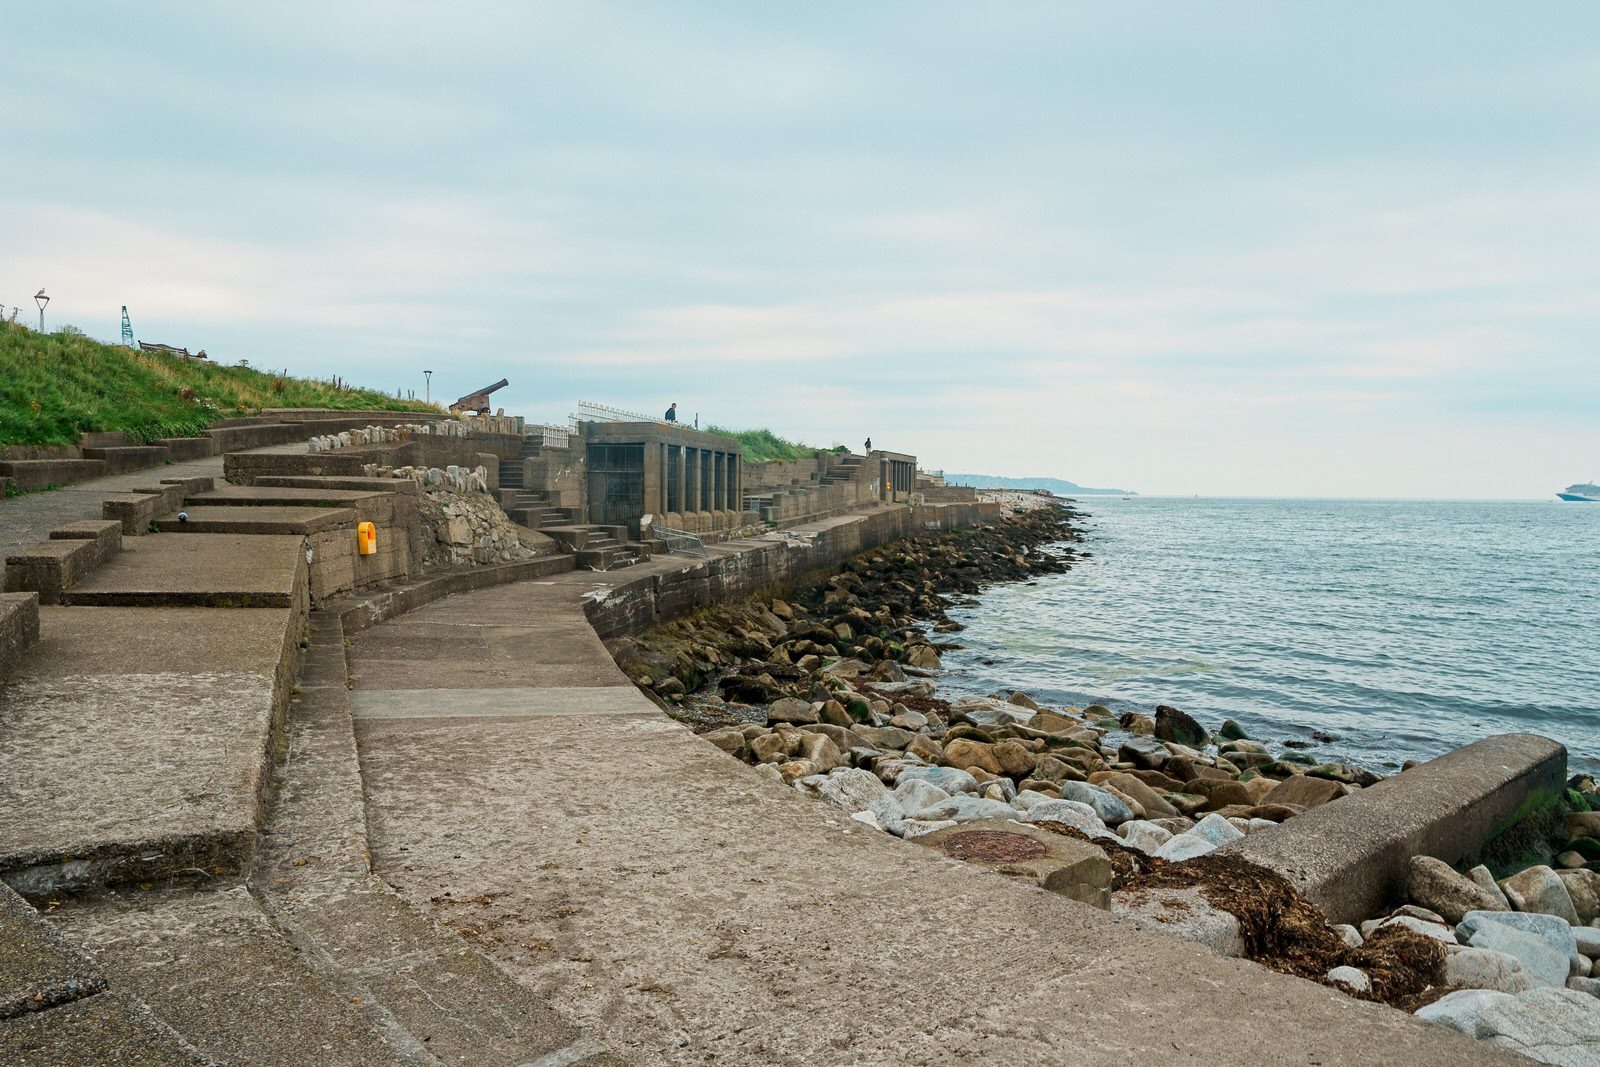 BETWEEN DUN LAOGHAIRE EAST PIER AND THE BATHS [THIS AREA HAS BEEN BADLY NEGLECTED] 006